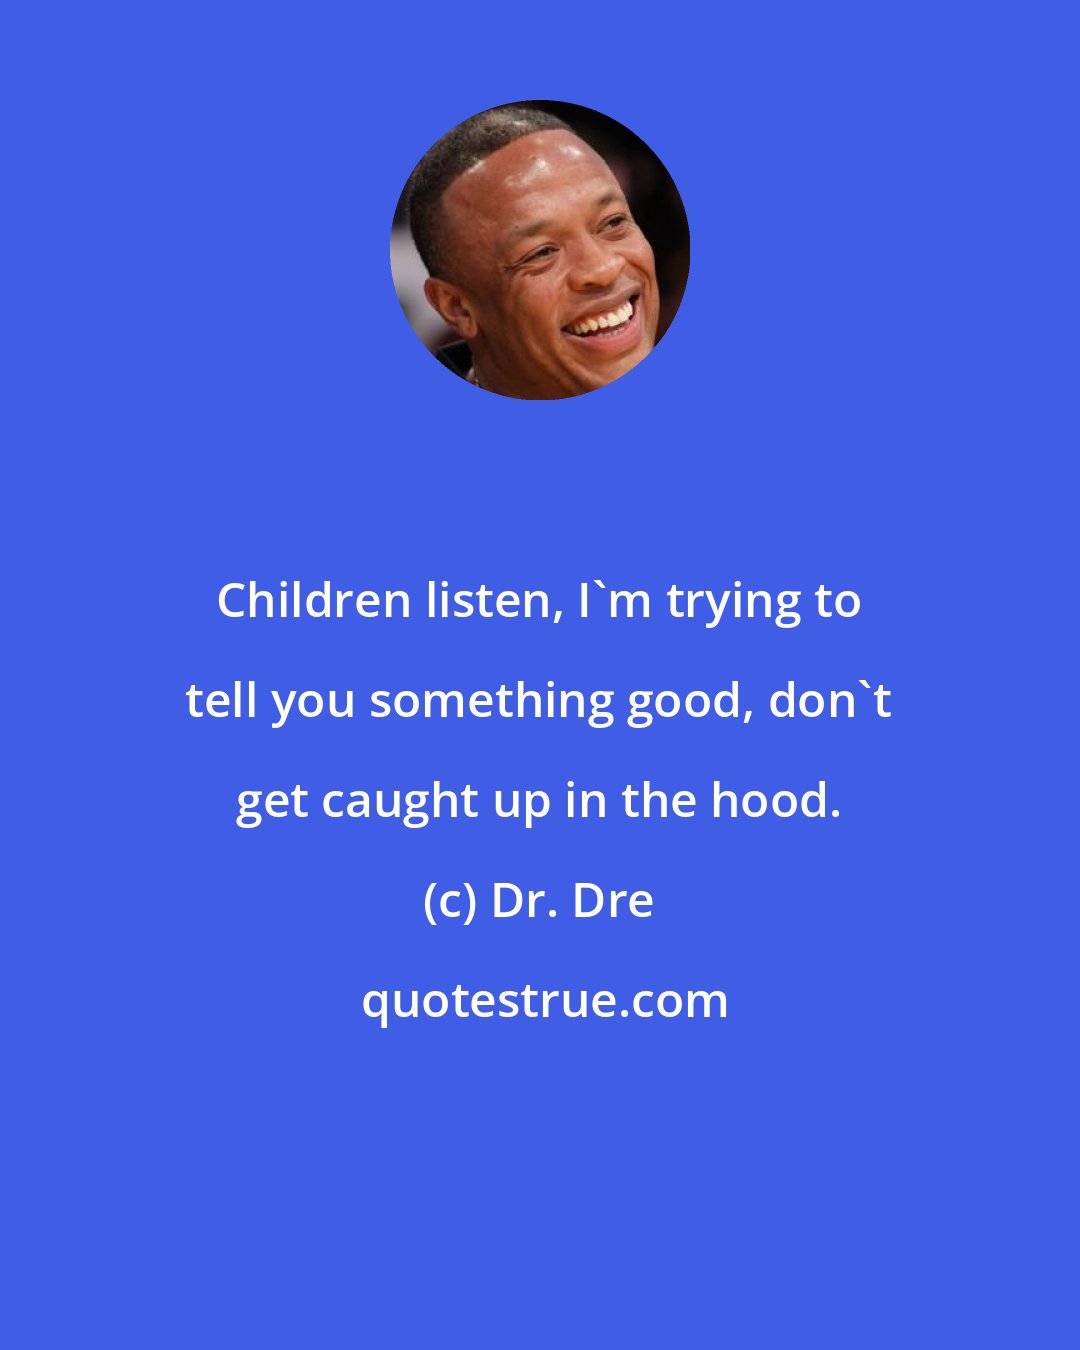 Dr. Dre: Children listen, I'm trying to tell you something good, don't get caught up in the hood.